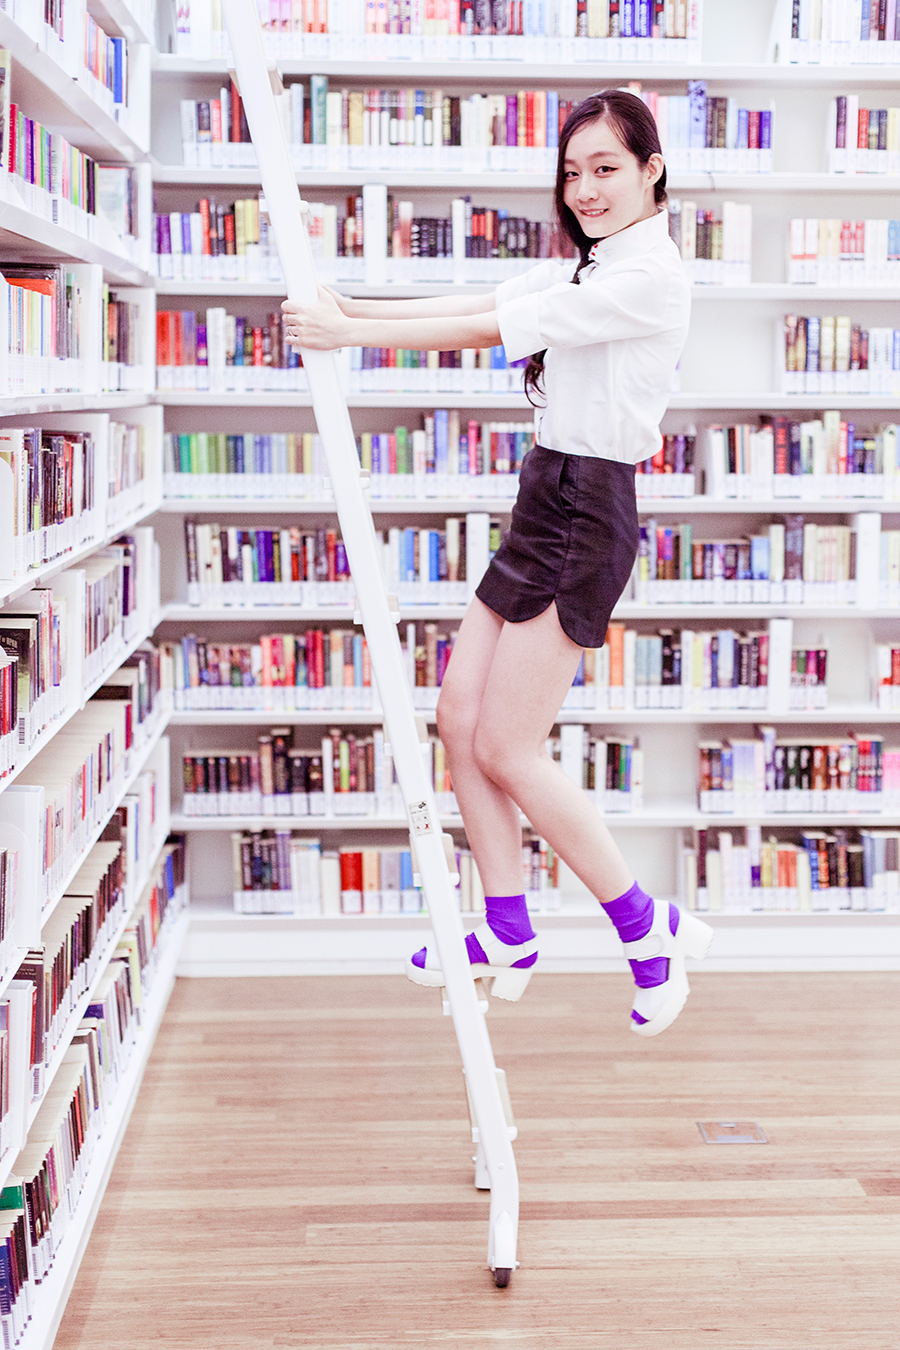 Bookworm outfit at design & lifestyle library library@orchard: Romwe quirky faces shirt, Topshop mini skirt, We Love Colors lavender socks, Taobao platform sandals.